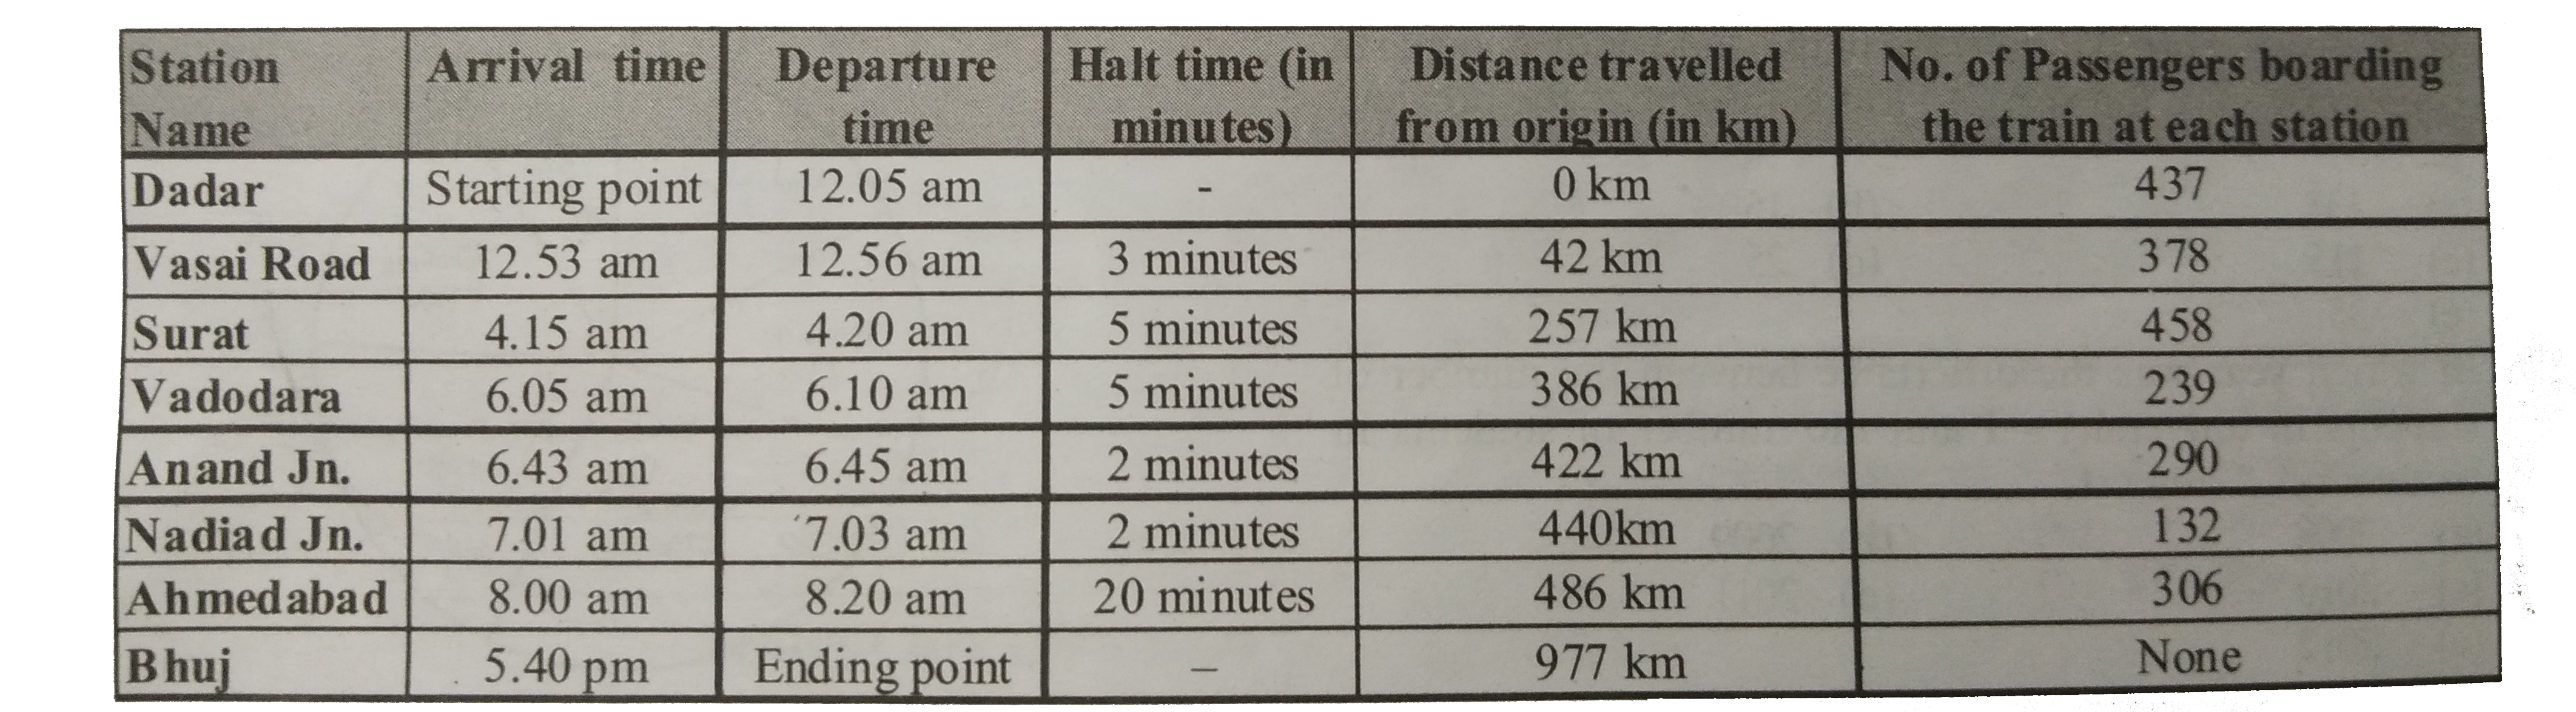 If halt time (stopping time) of the train at Vododara is decreases by 2 minutes and increased by 23 minutes at Ahmedabad. At what time will the train reach Bhuj ?